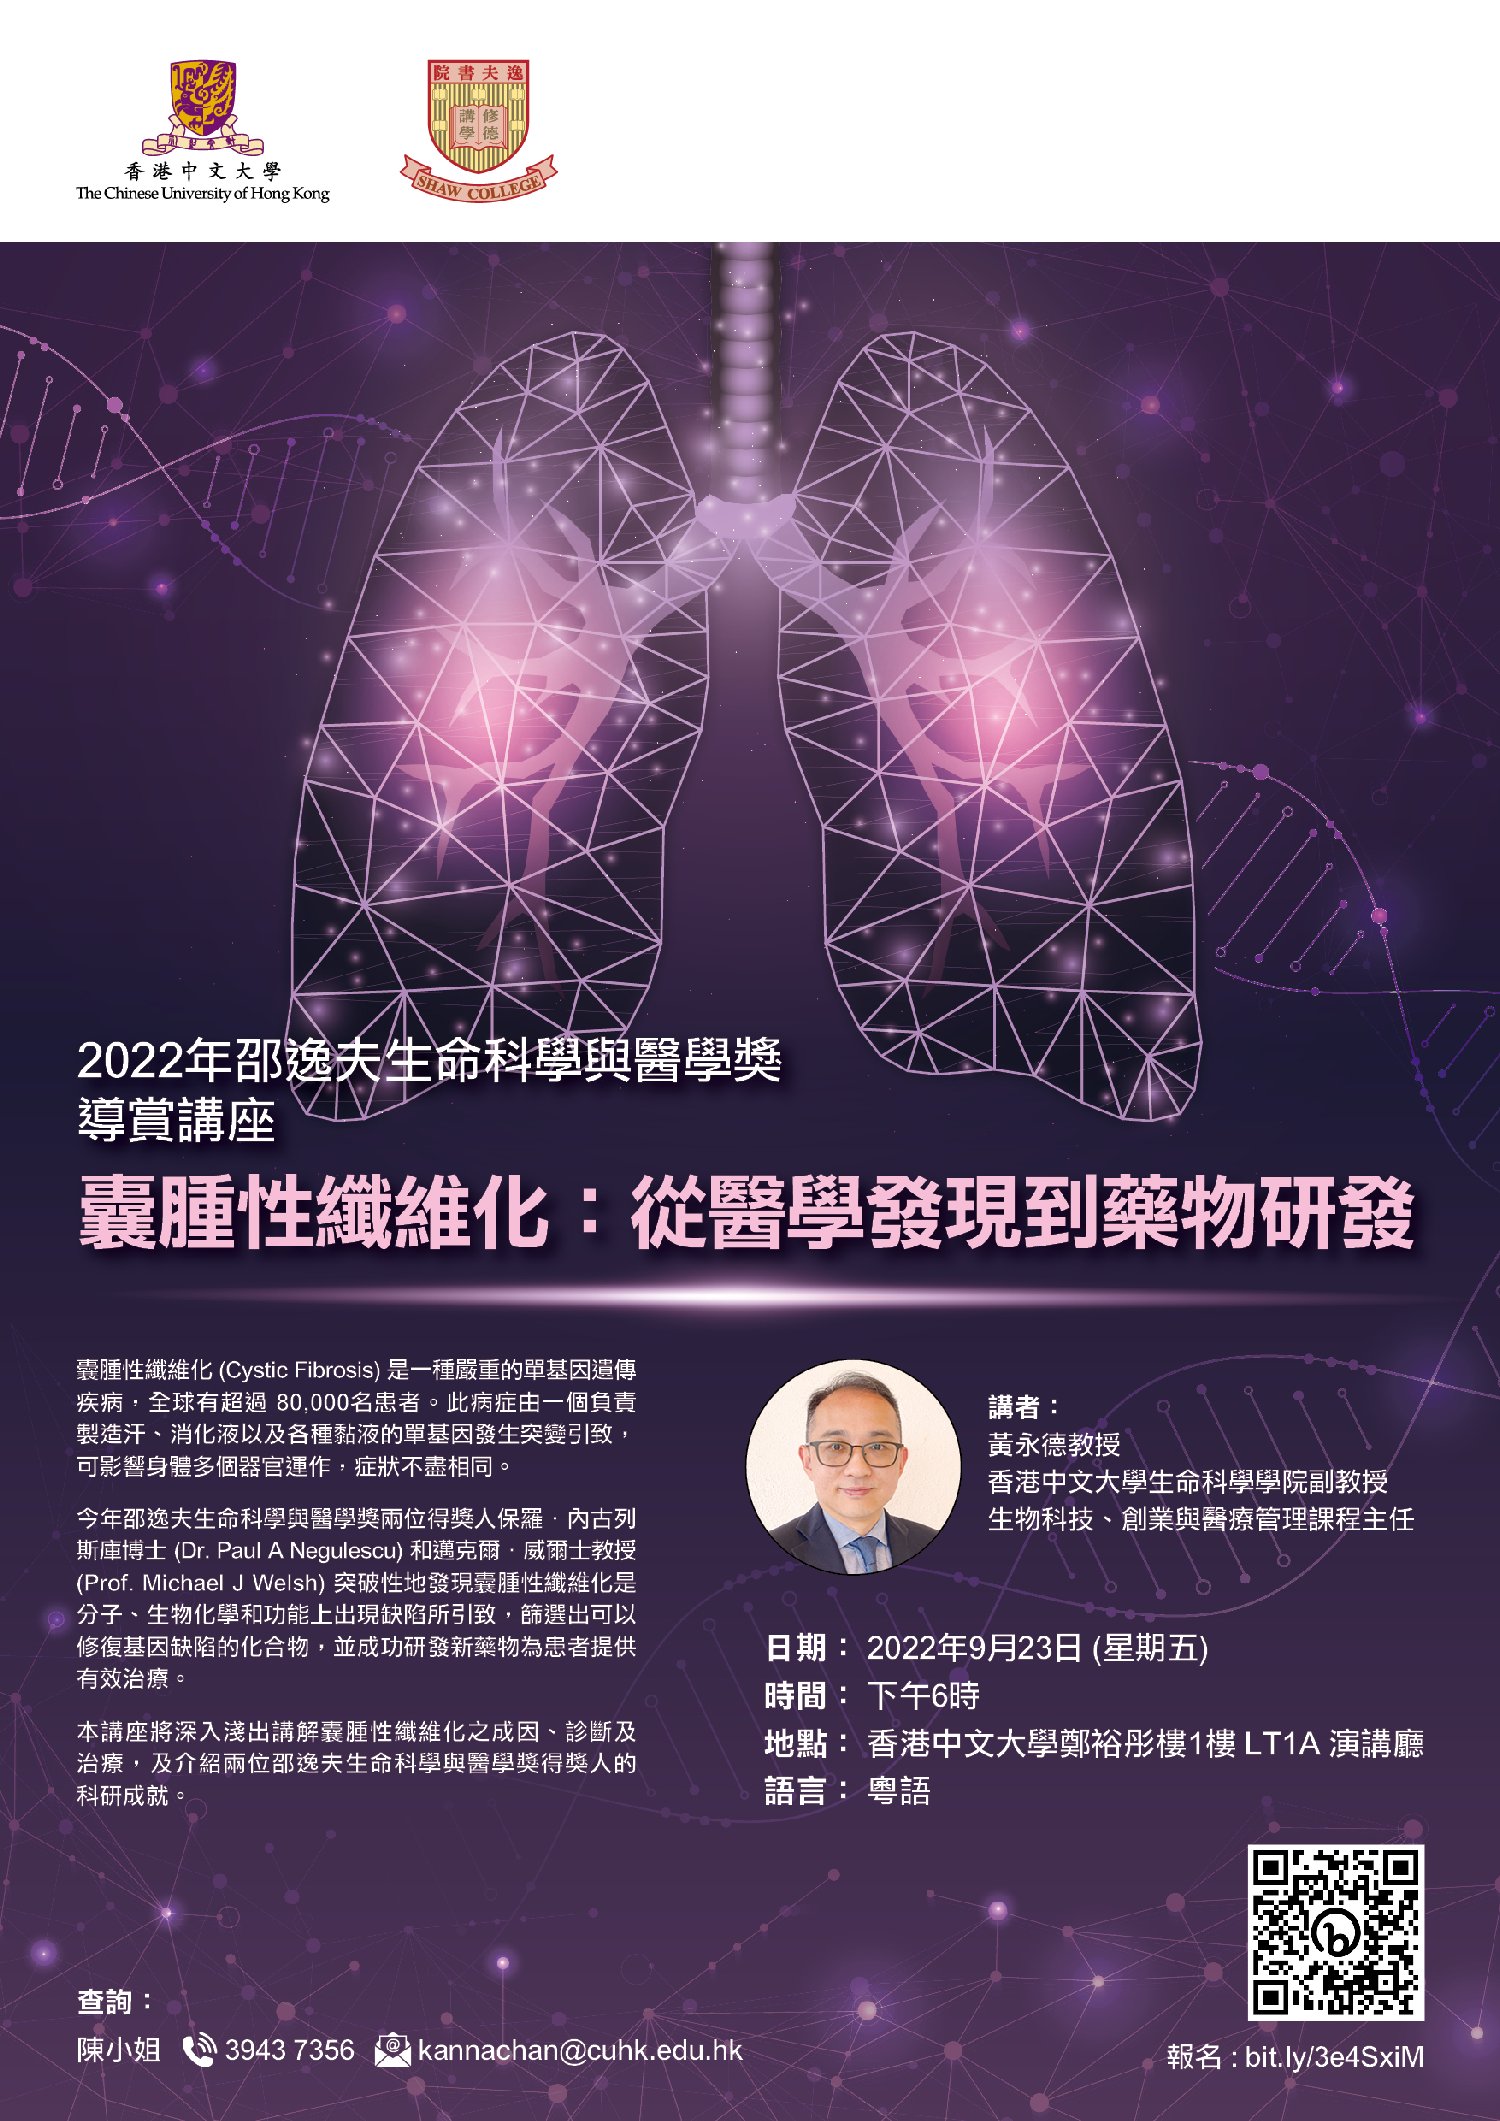 CUHK Introductory Lecture JW for The Shaw Prize Lecture 2022 resized